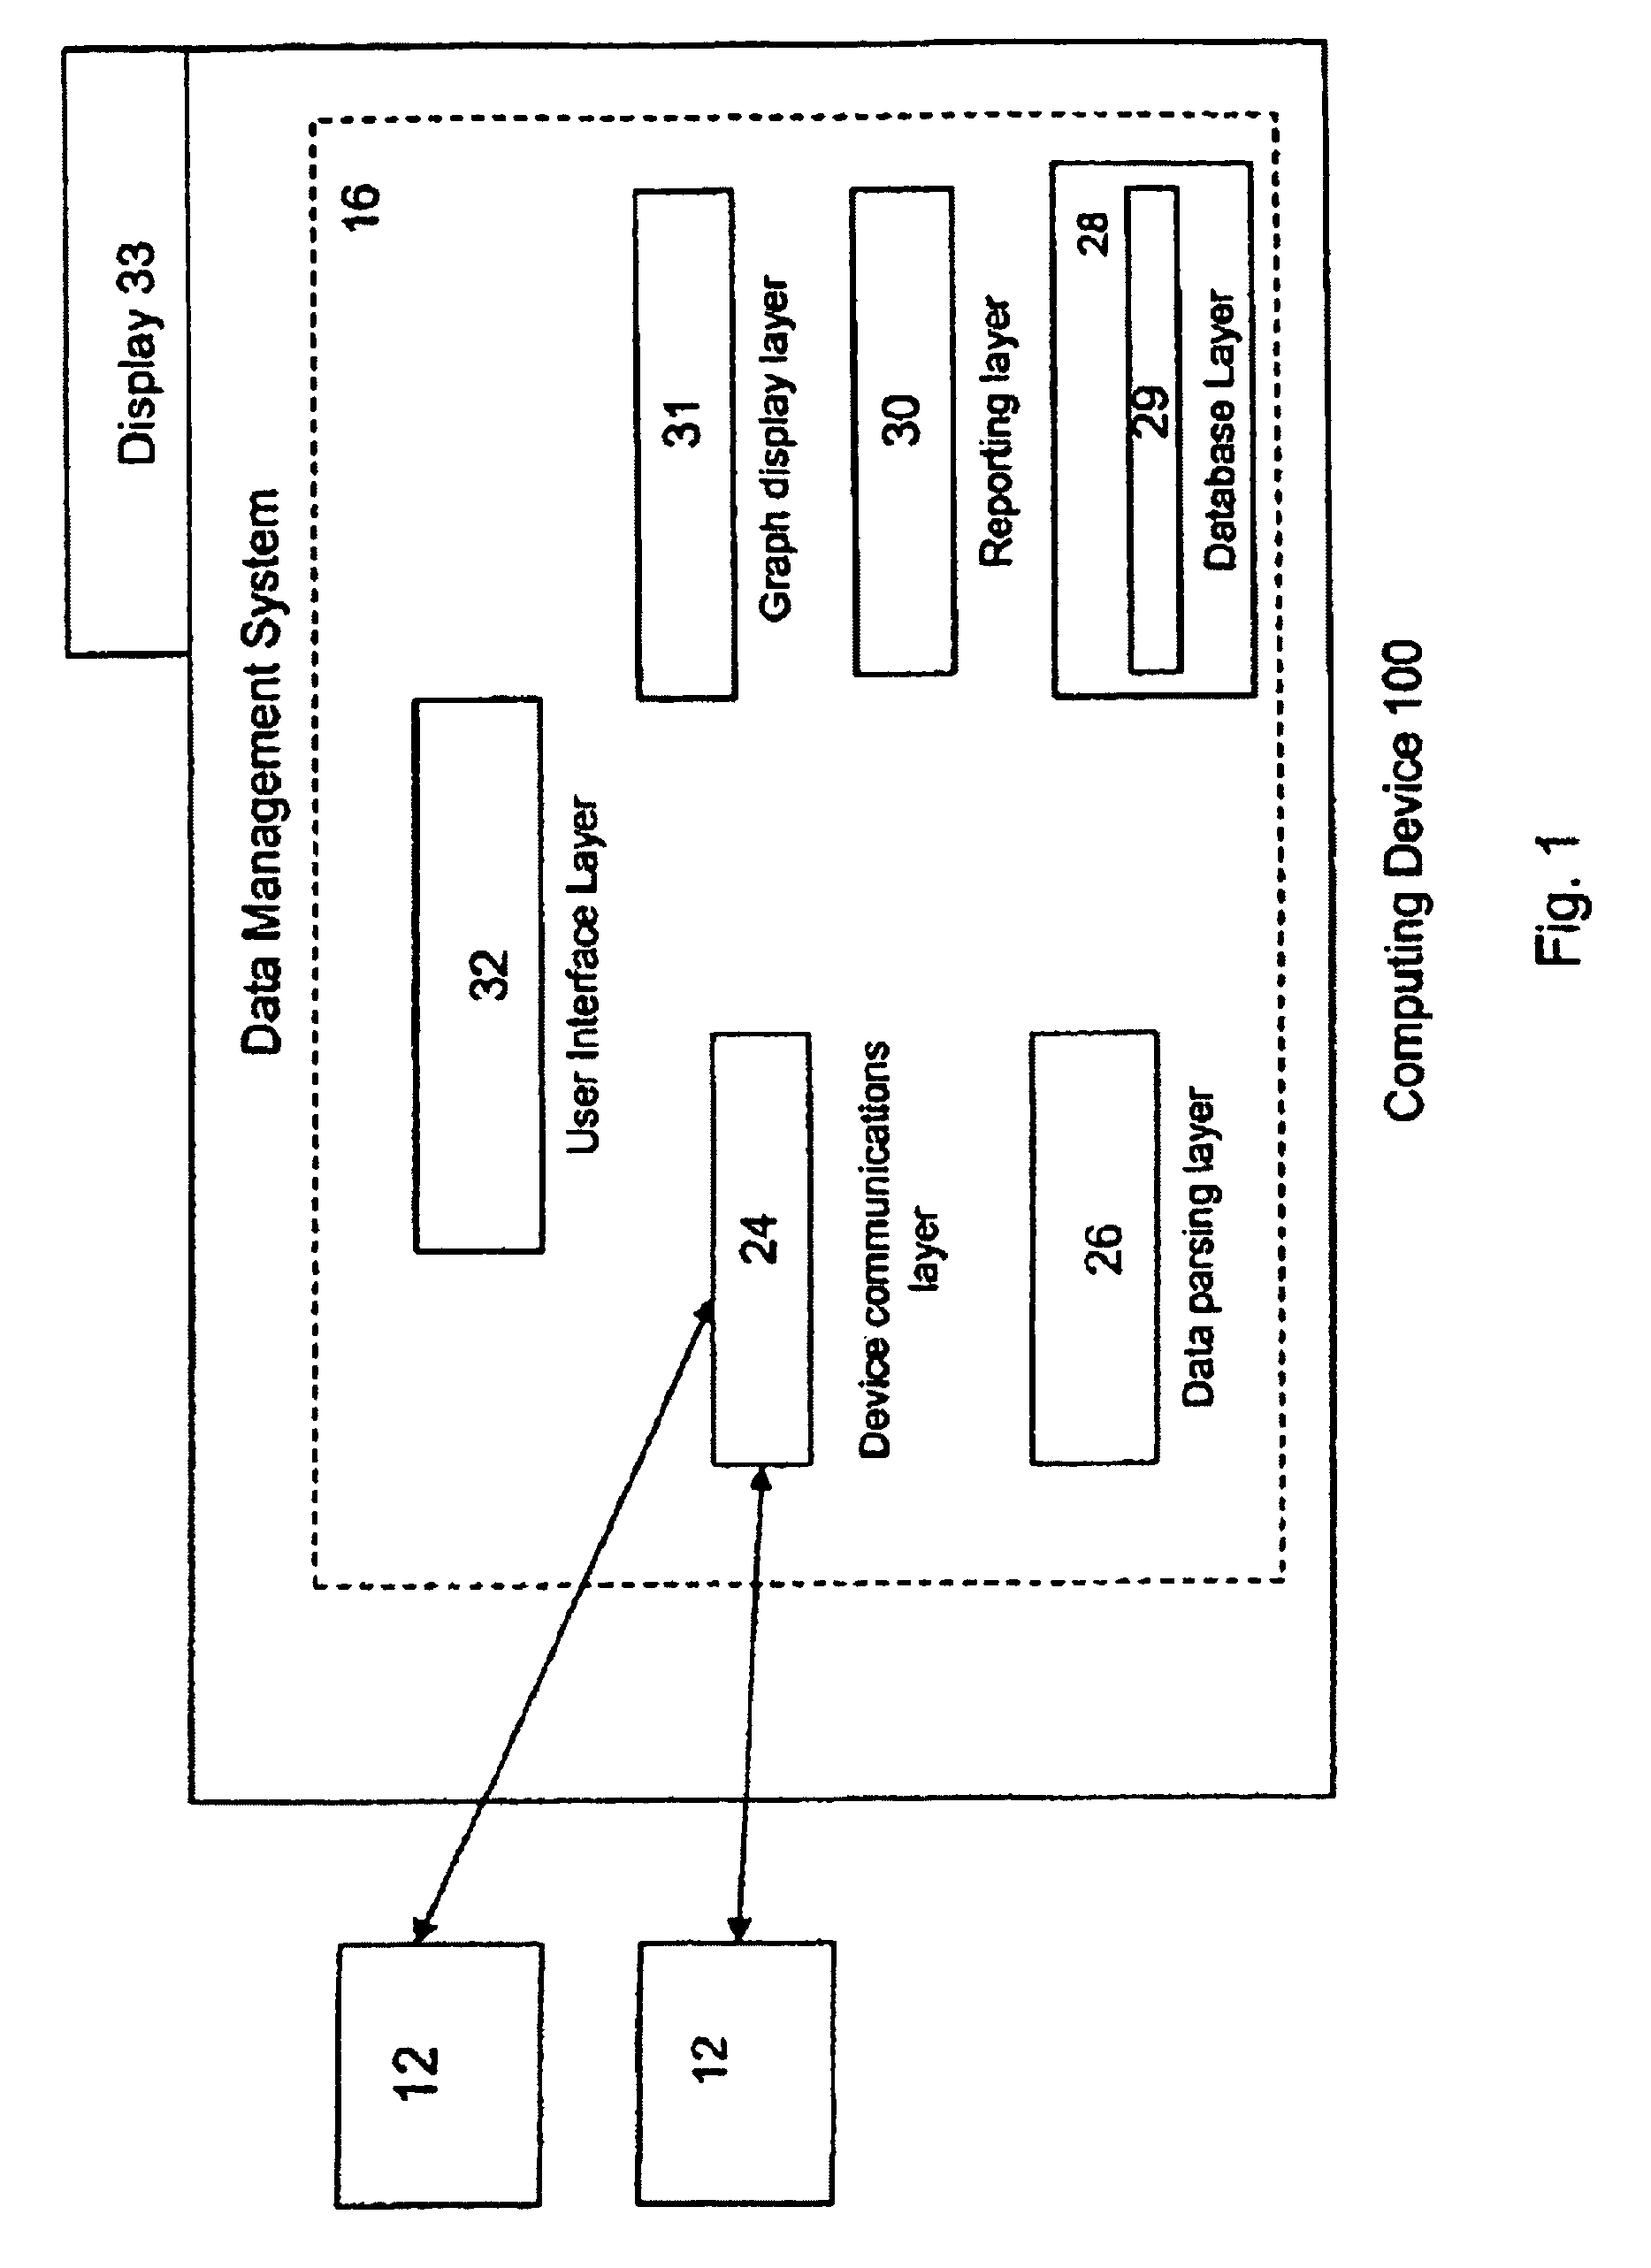 Pattern recognition and filtering in a therapy management system